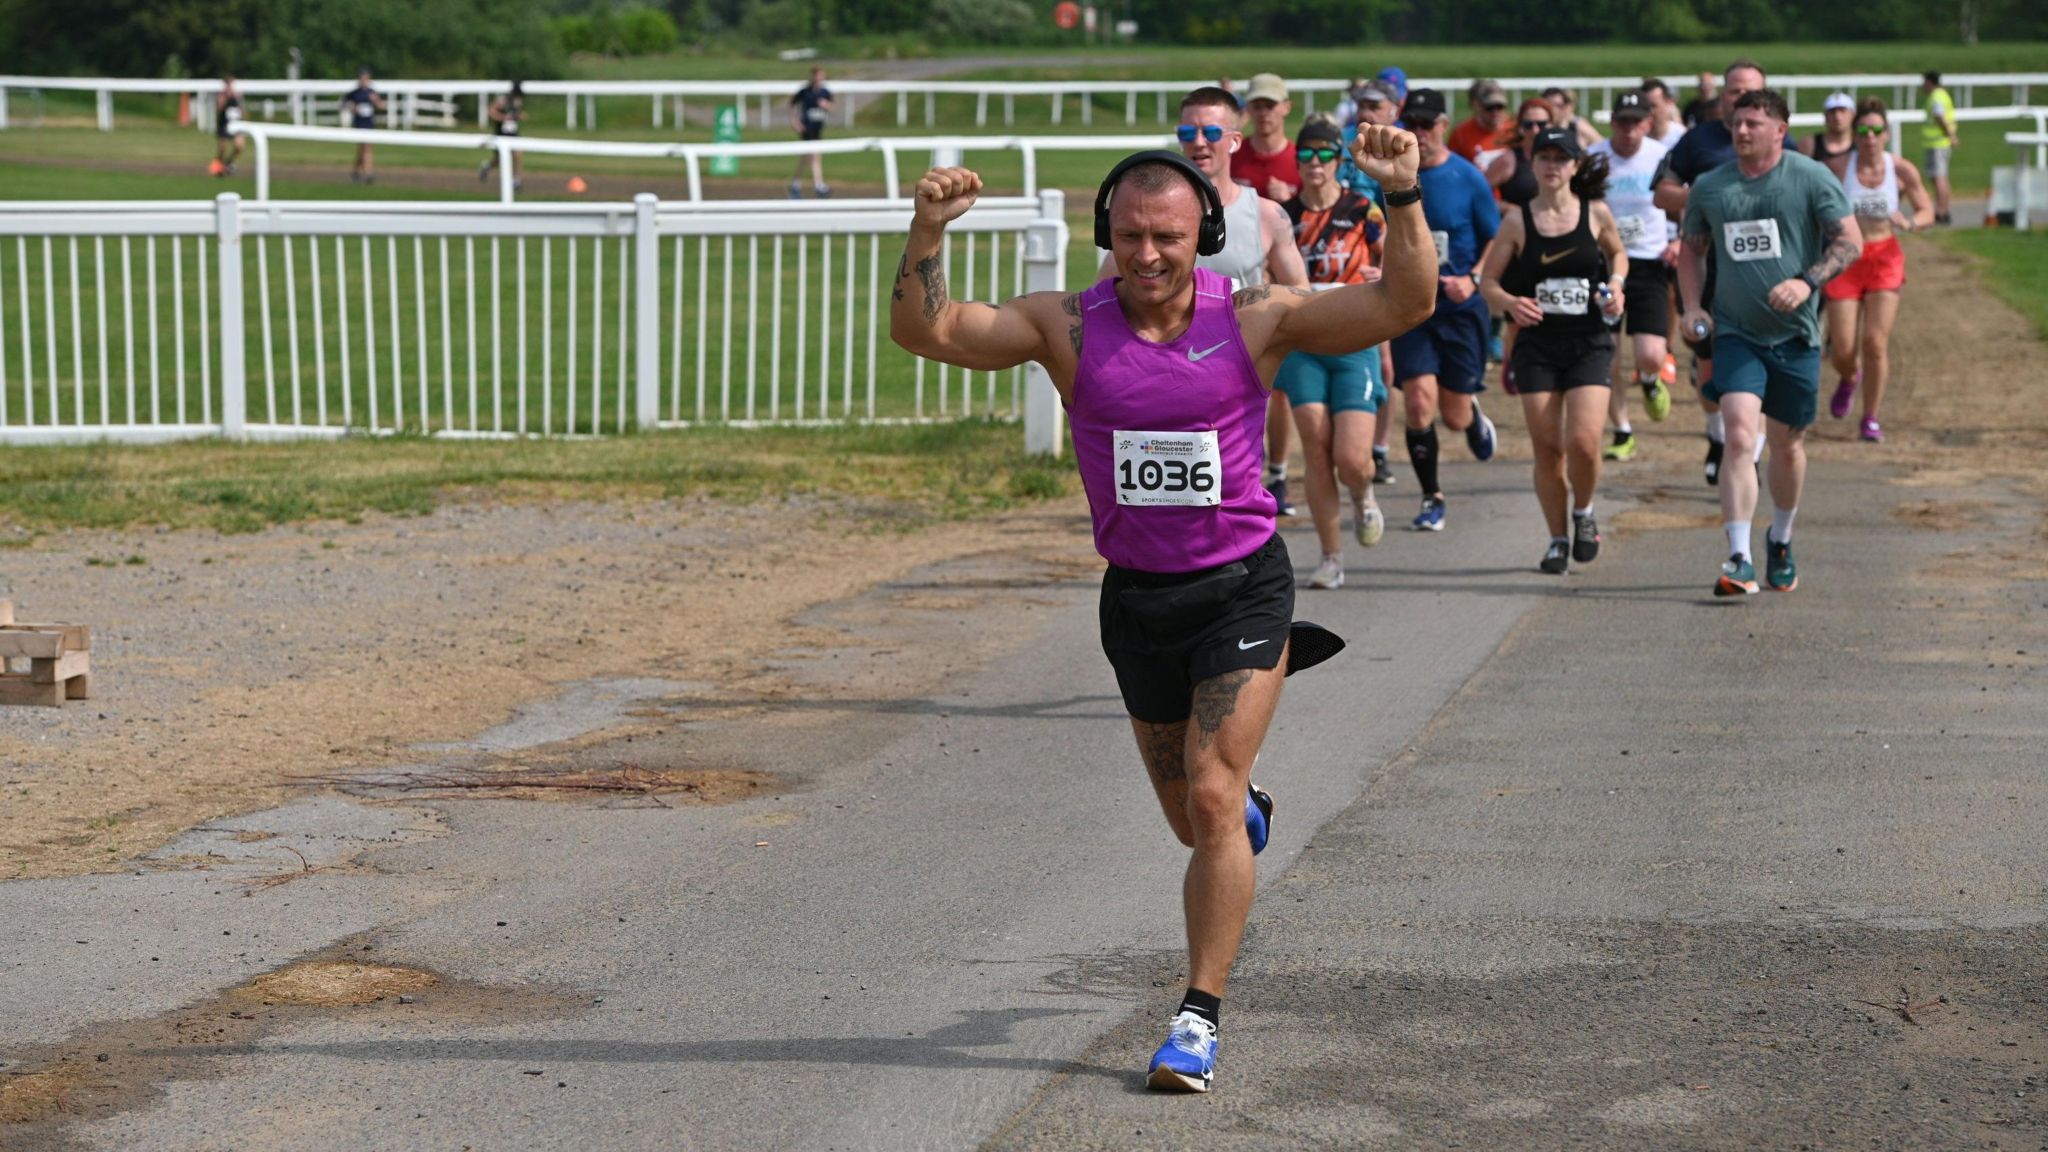 A man on Cheltenham racecourse in running gear holding both arms up while others run behind him